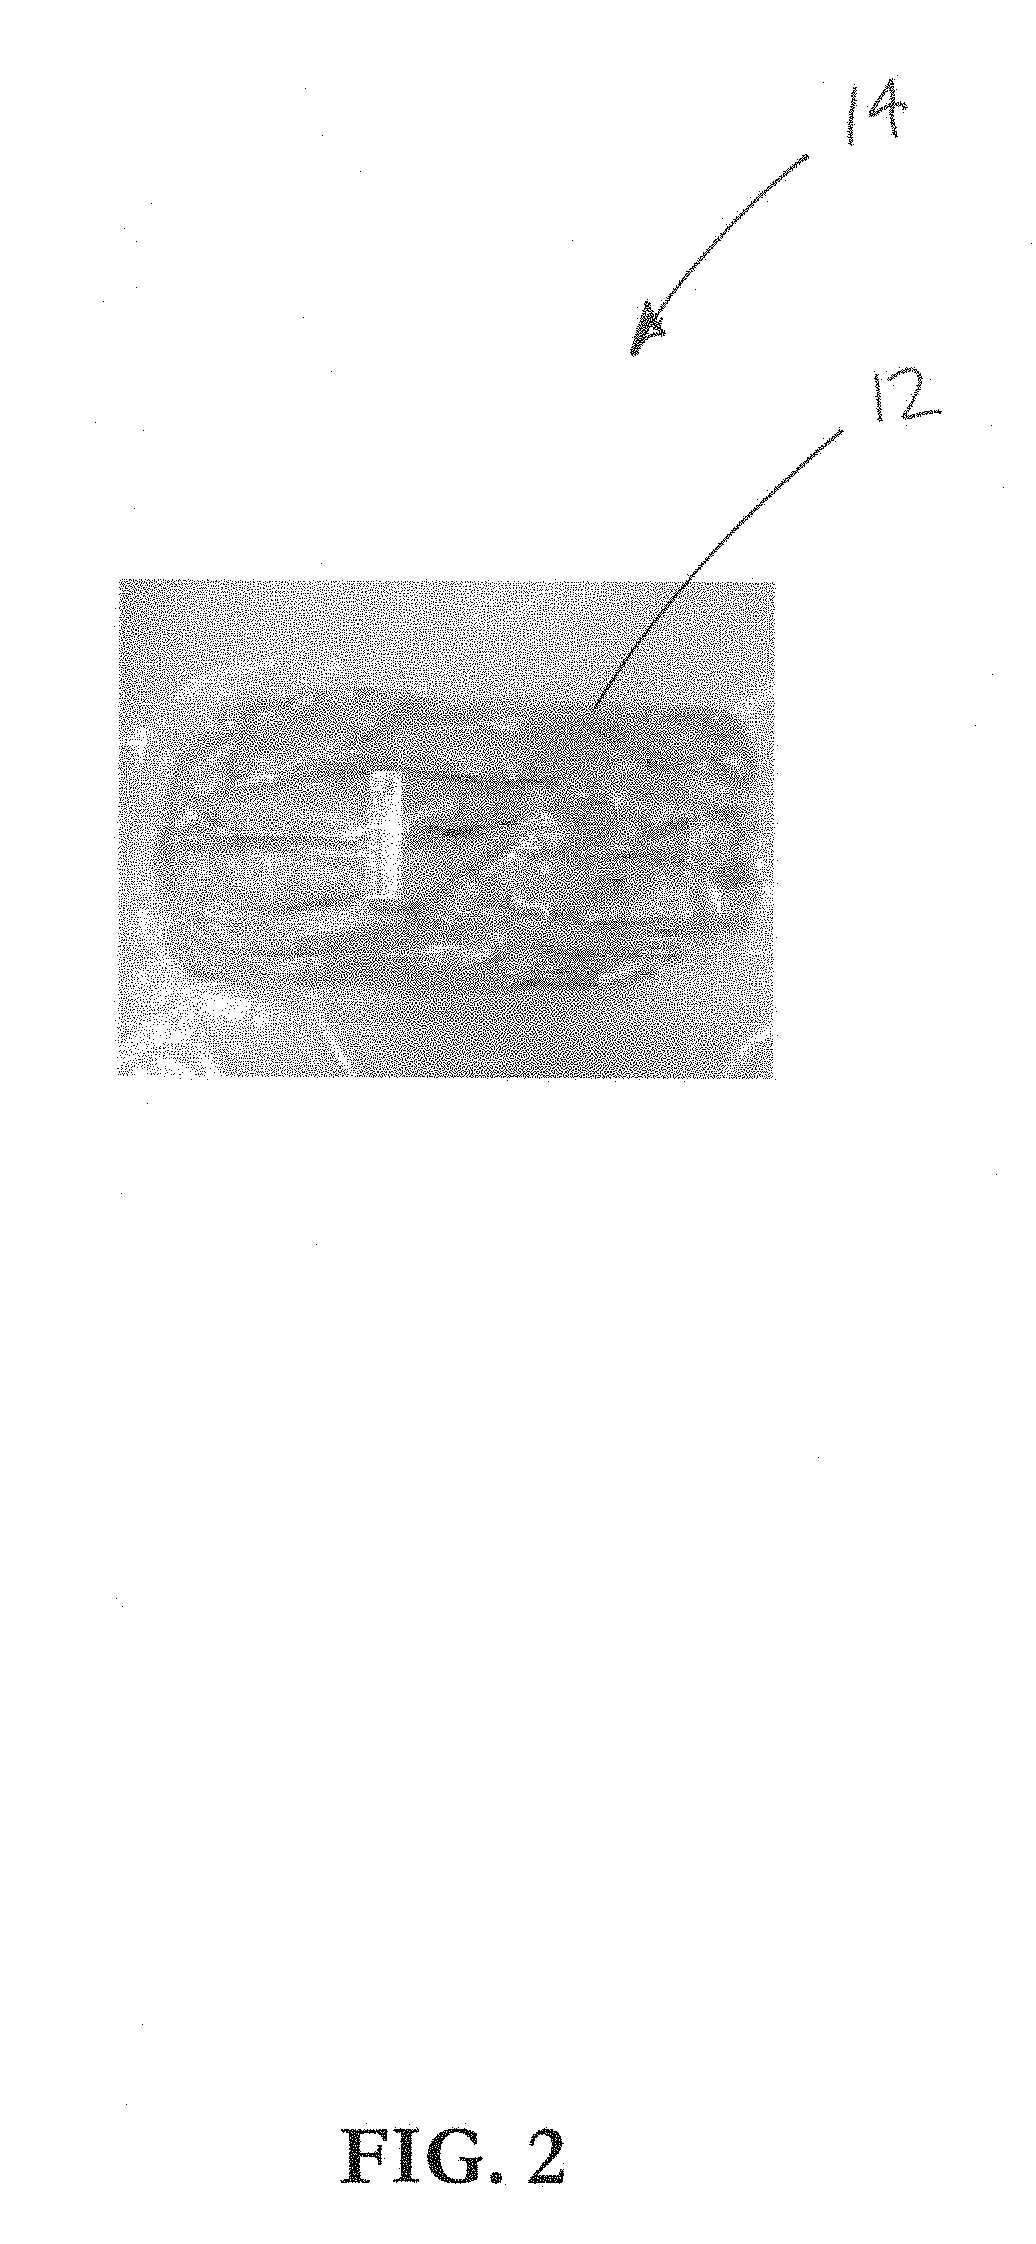 Apparatus, Systems and Methods for Minimizing Lipid Oxidation in Food Product